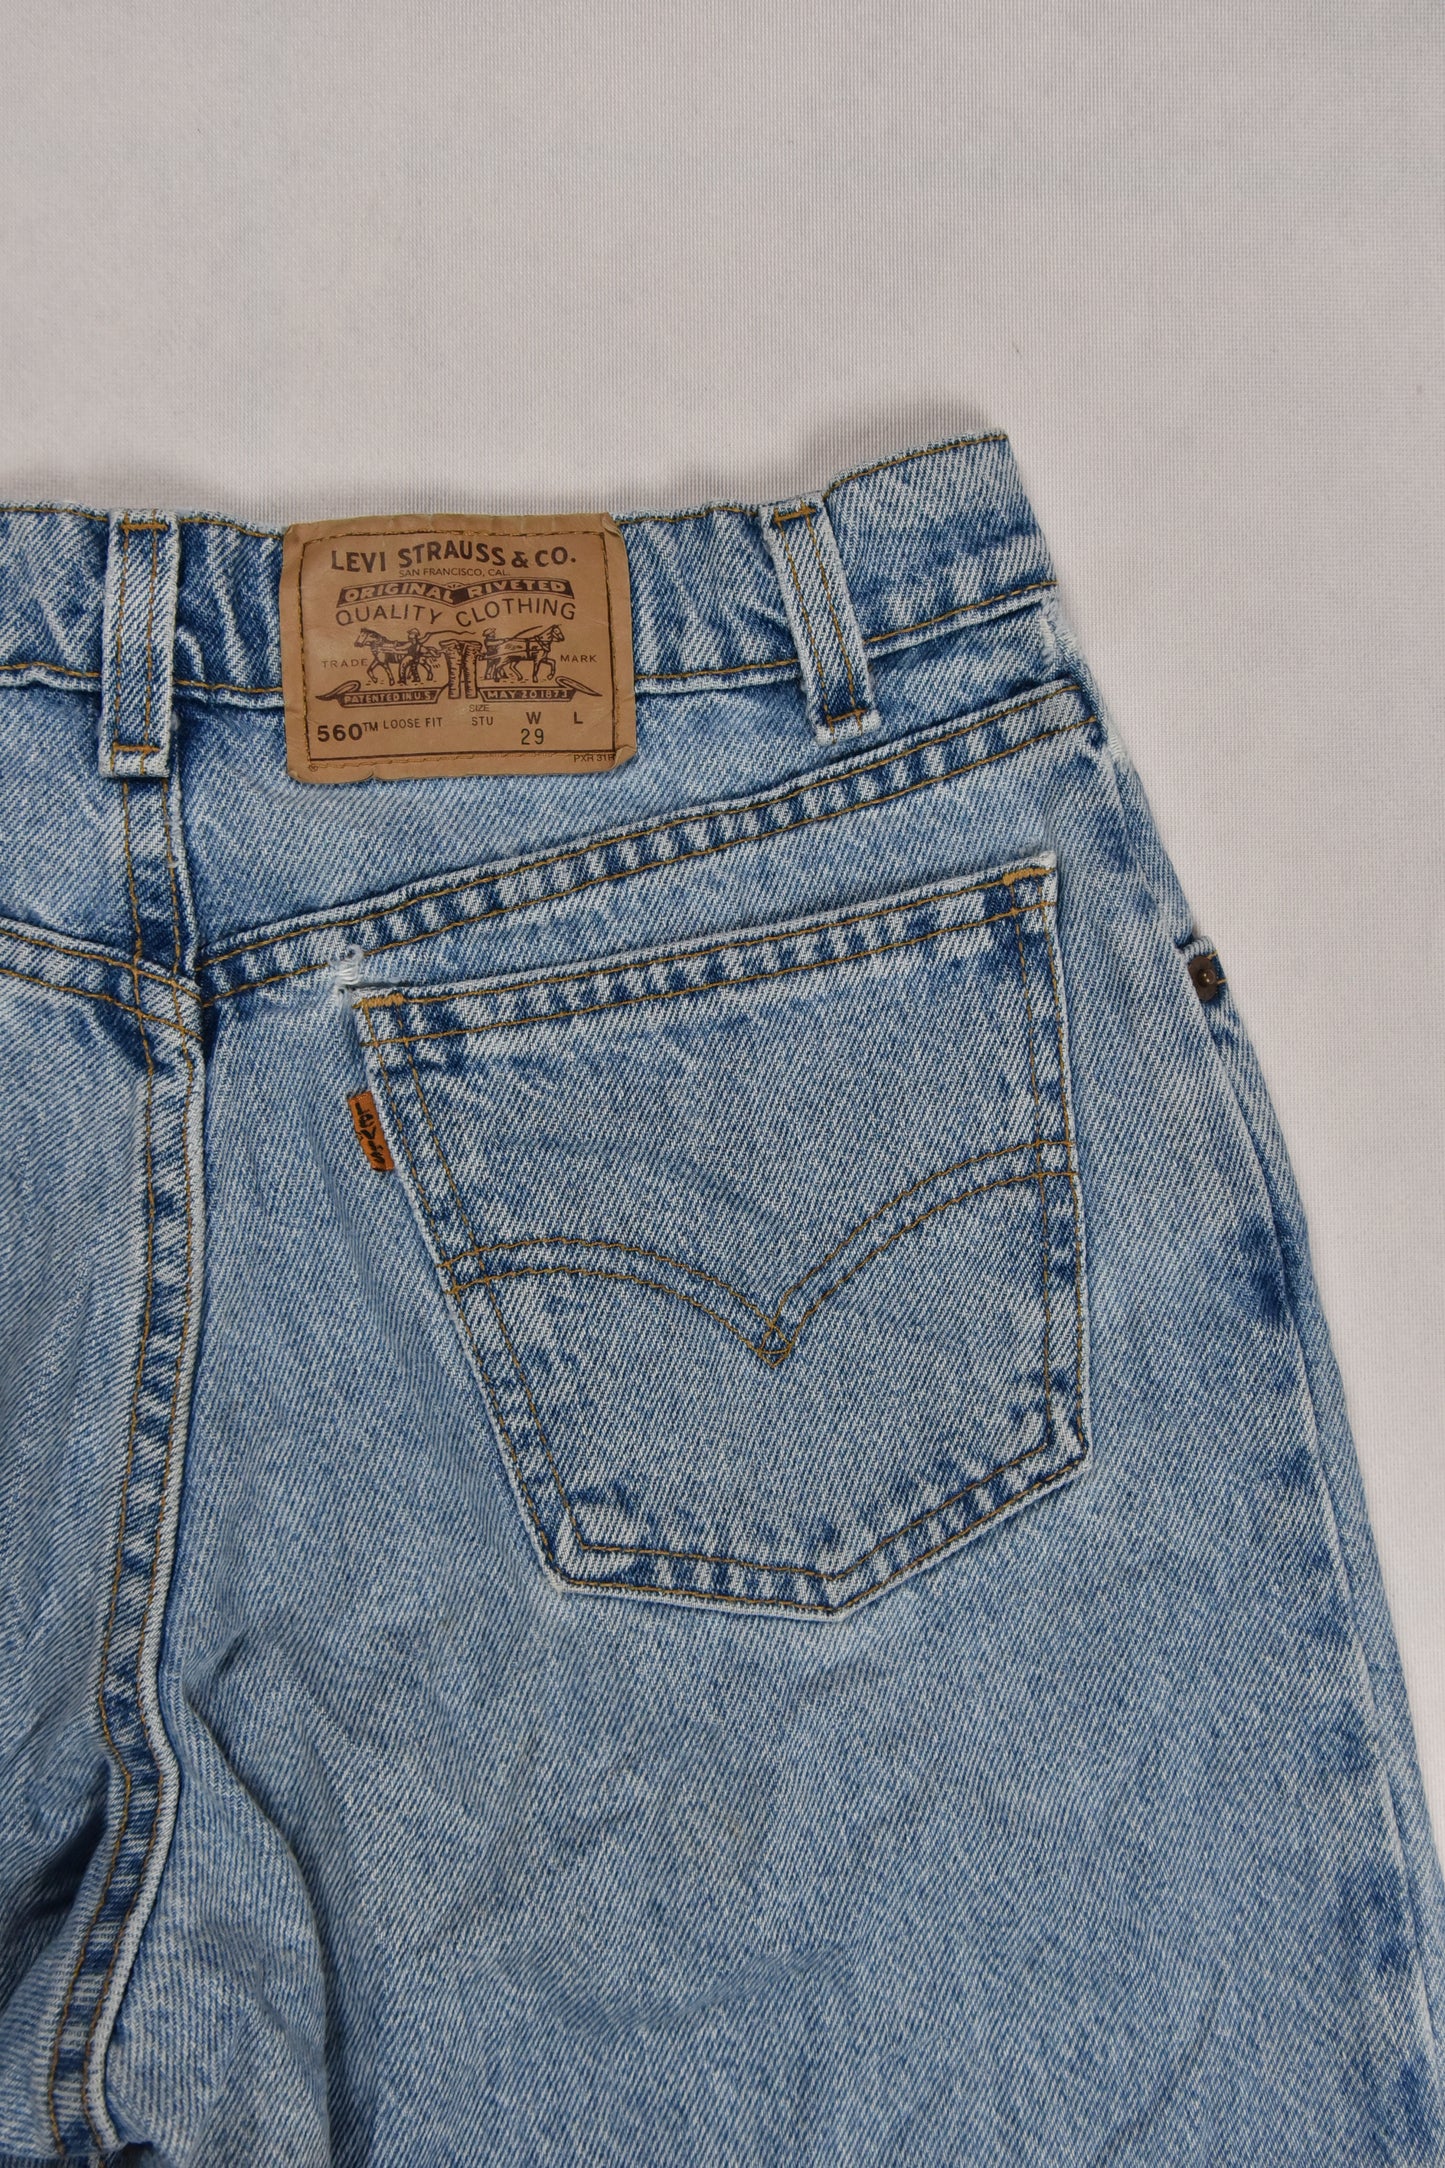 Levi's 560 Orange Tab Cropped Jeans Made in USA Vintage / 29